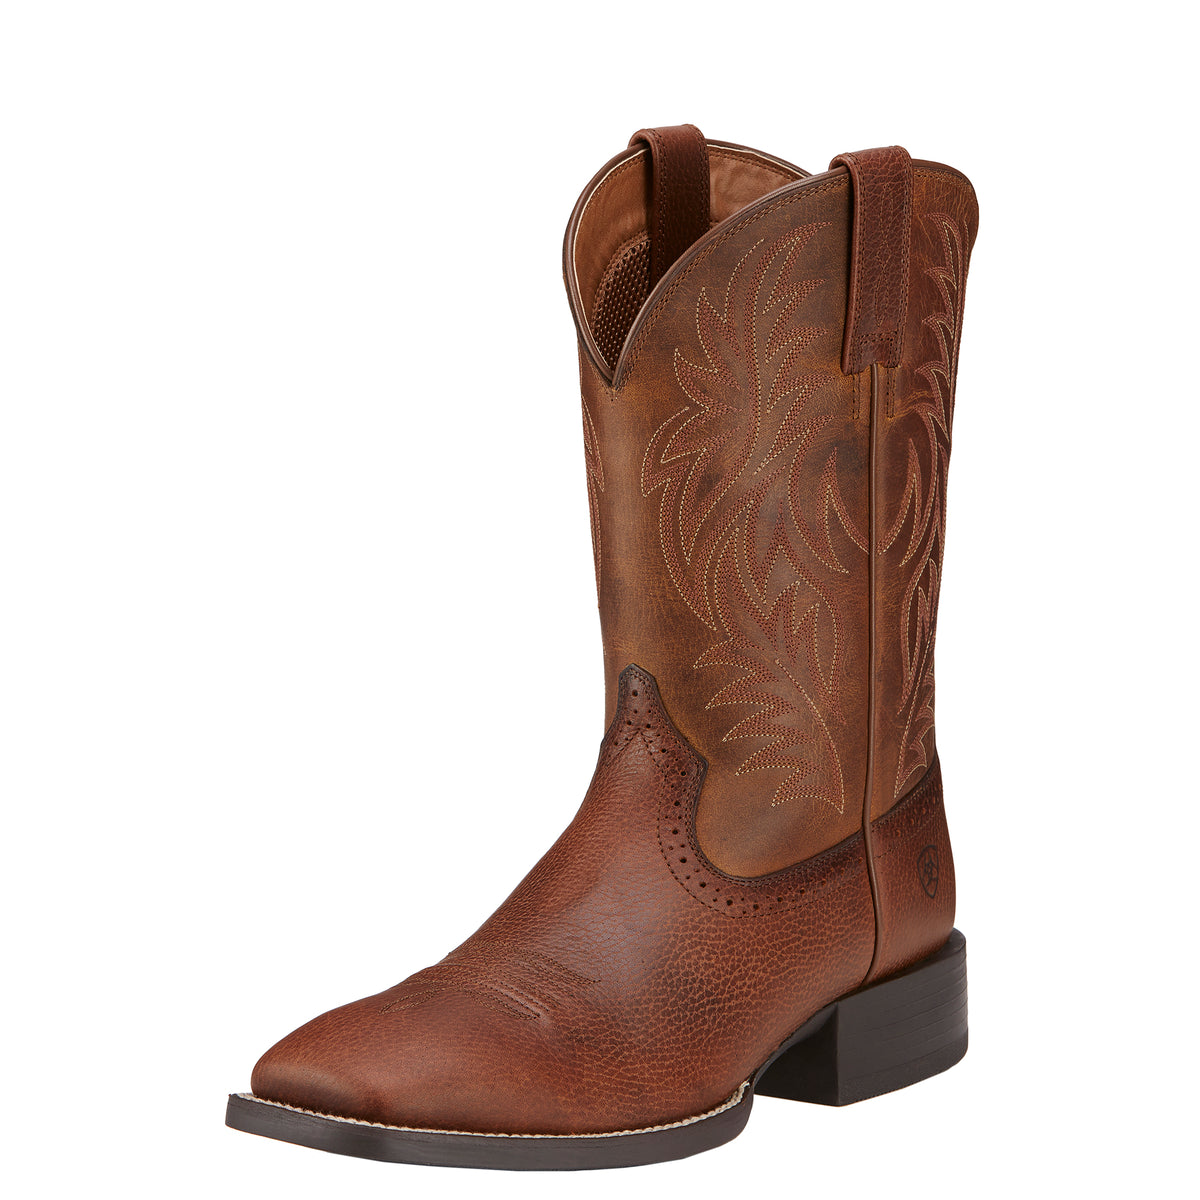 Ariat Mens Sport Western Wide Square Toe - Fiddle Brown/Brown